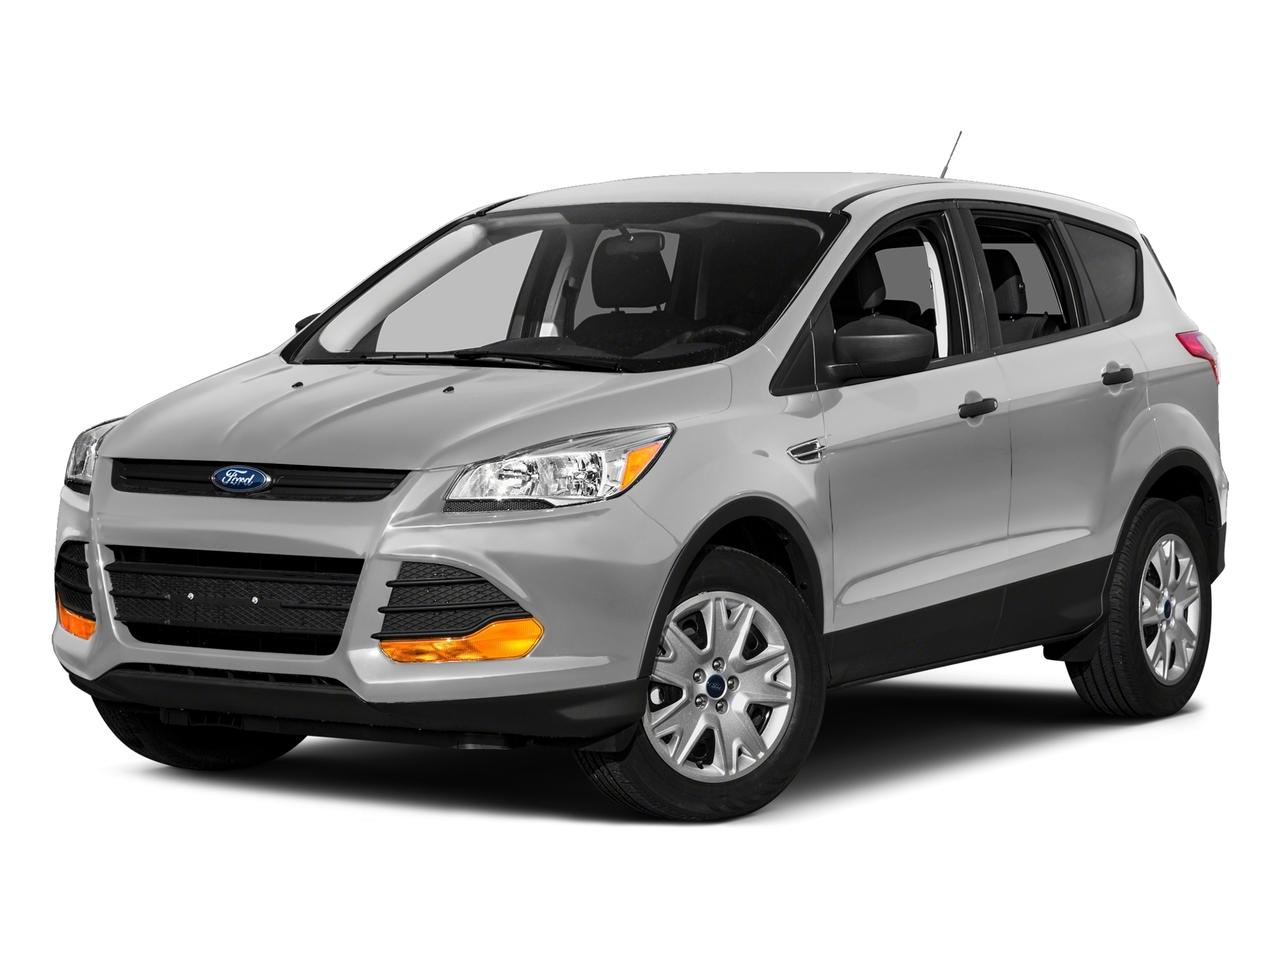 2016 Ford Escape Vehicle Photo in Saint Charles, IL 60174